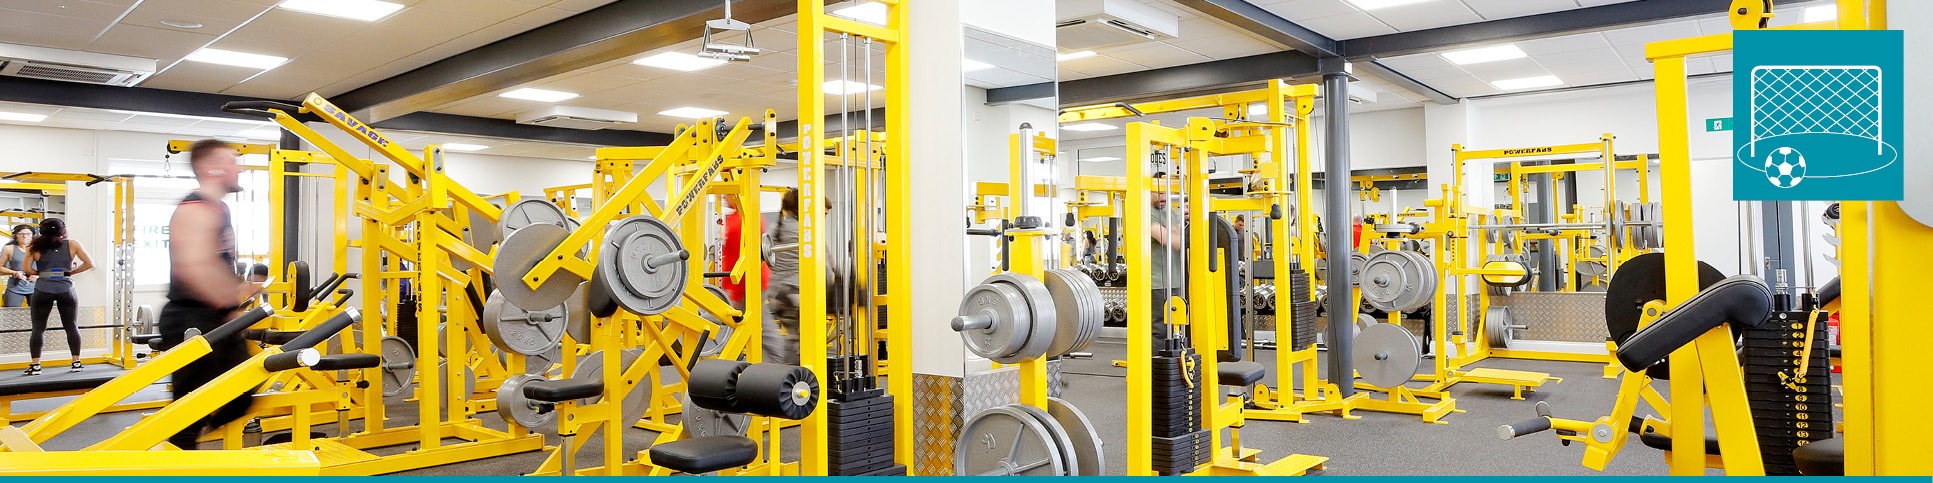 Tamlite sports header gym with icon